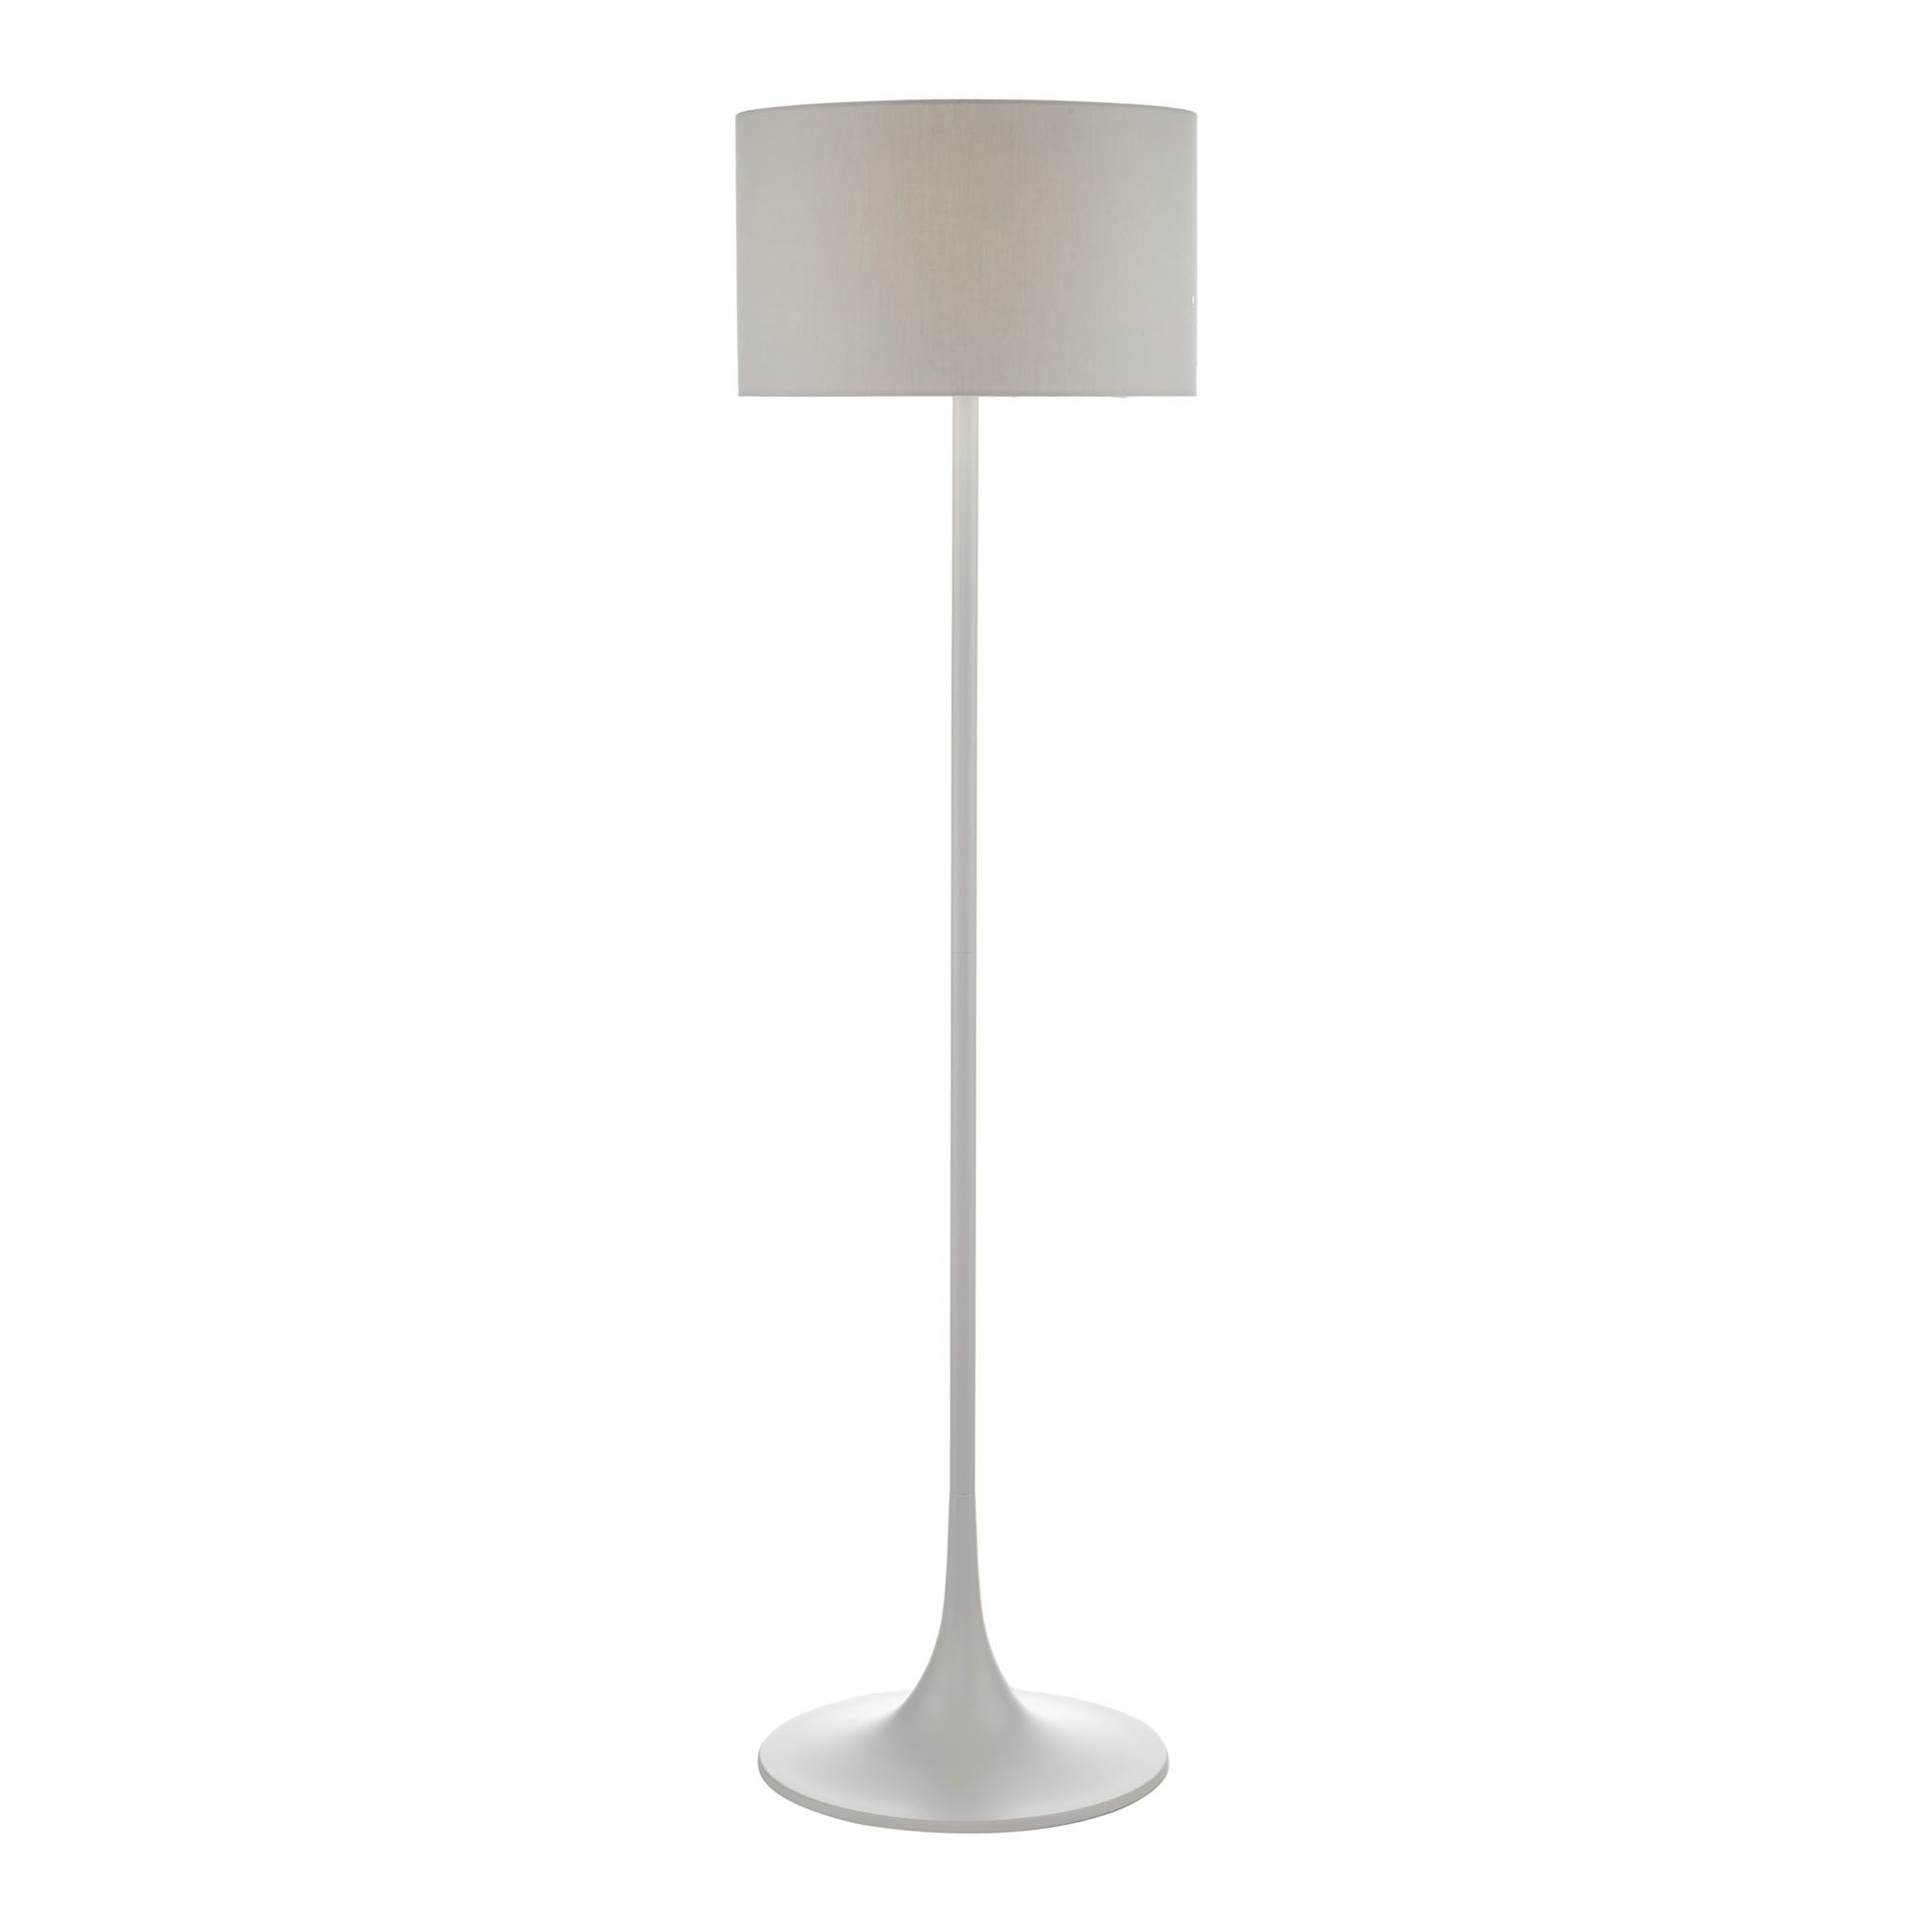 Floor Lamp Grey With Shade, Floor Lamp With Table Attached Australia